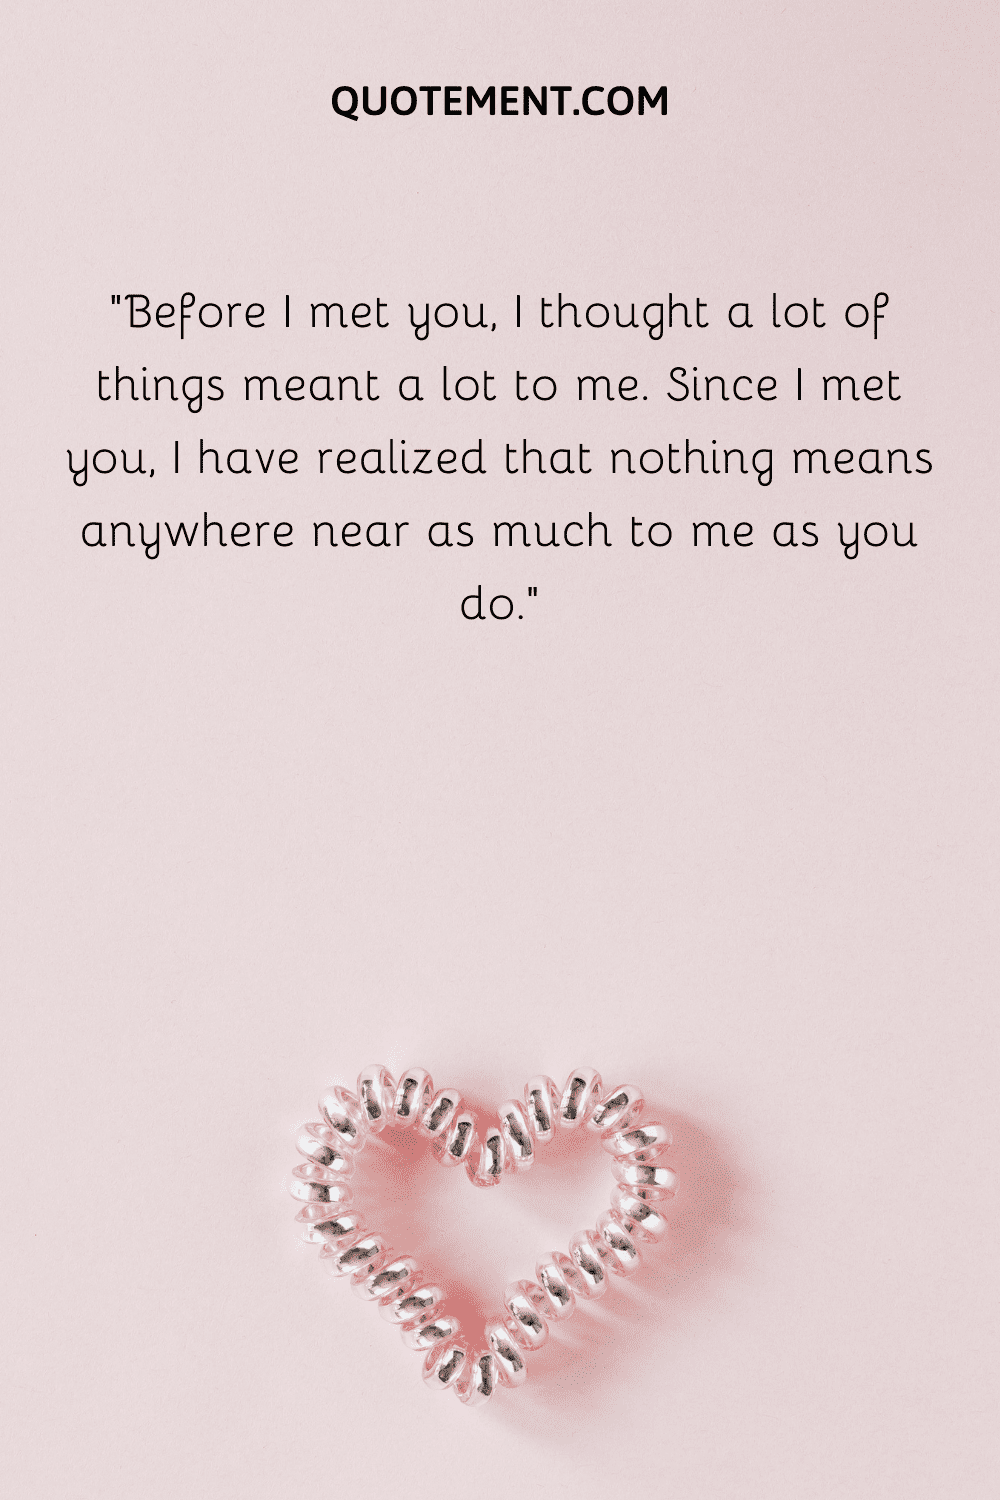 “Before I met you, I thought a lot of things meant a lot to me. Since I met you, I have realized that nothing means anywhere near as much to me as you do.”